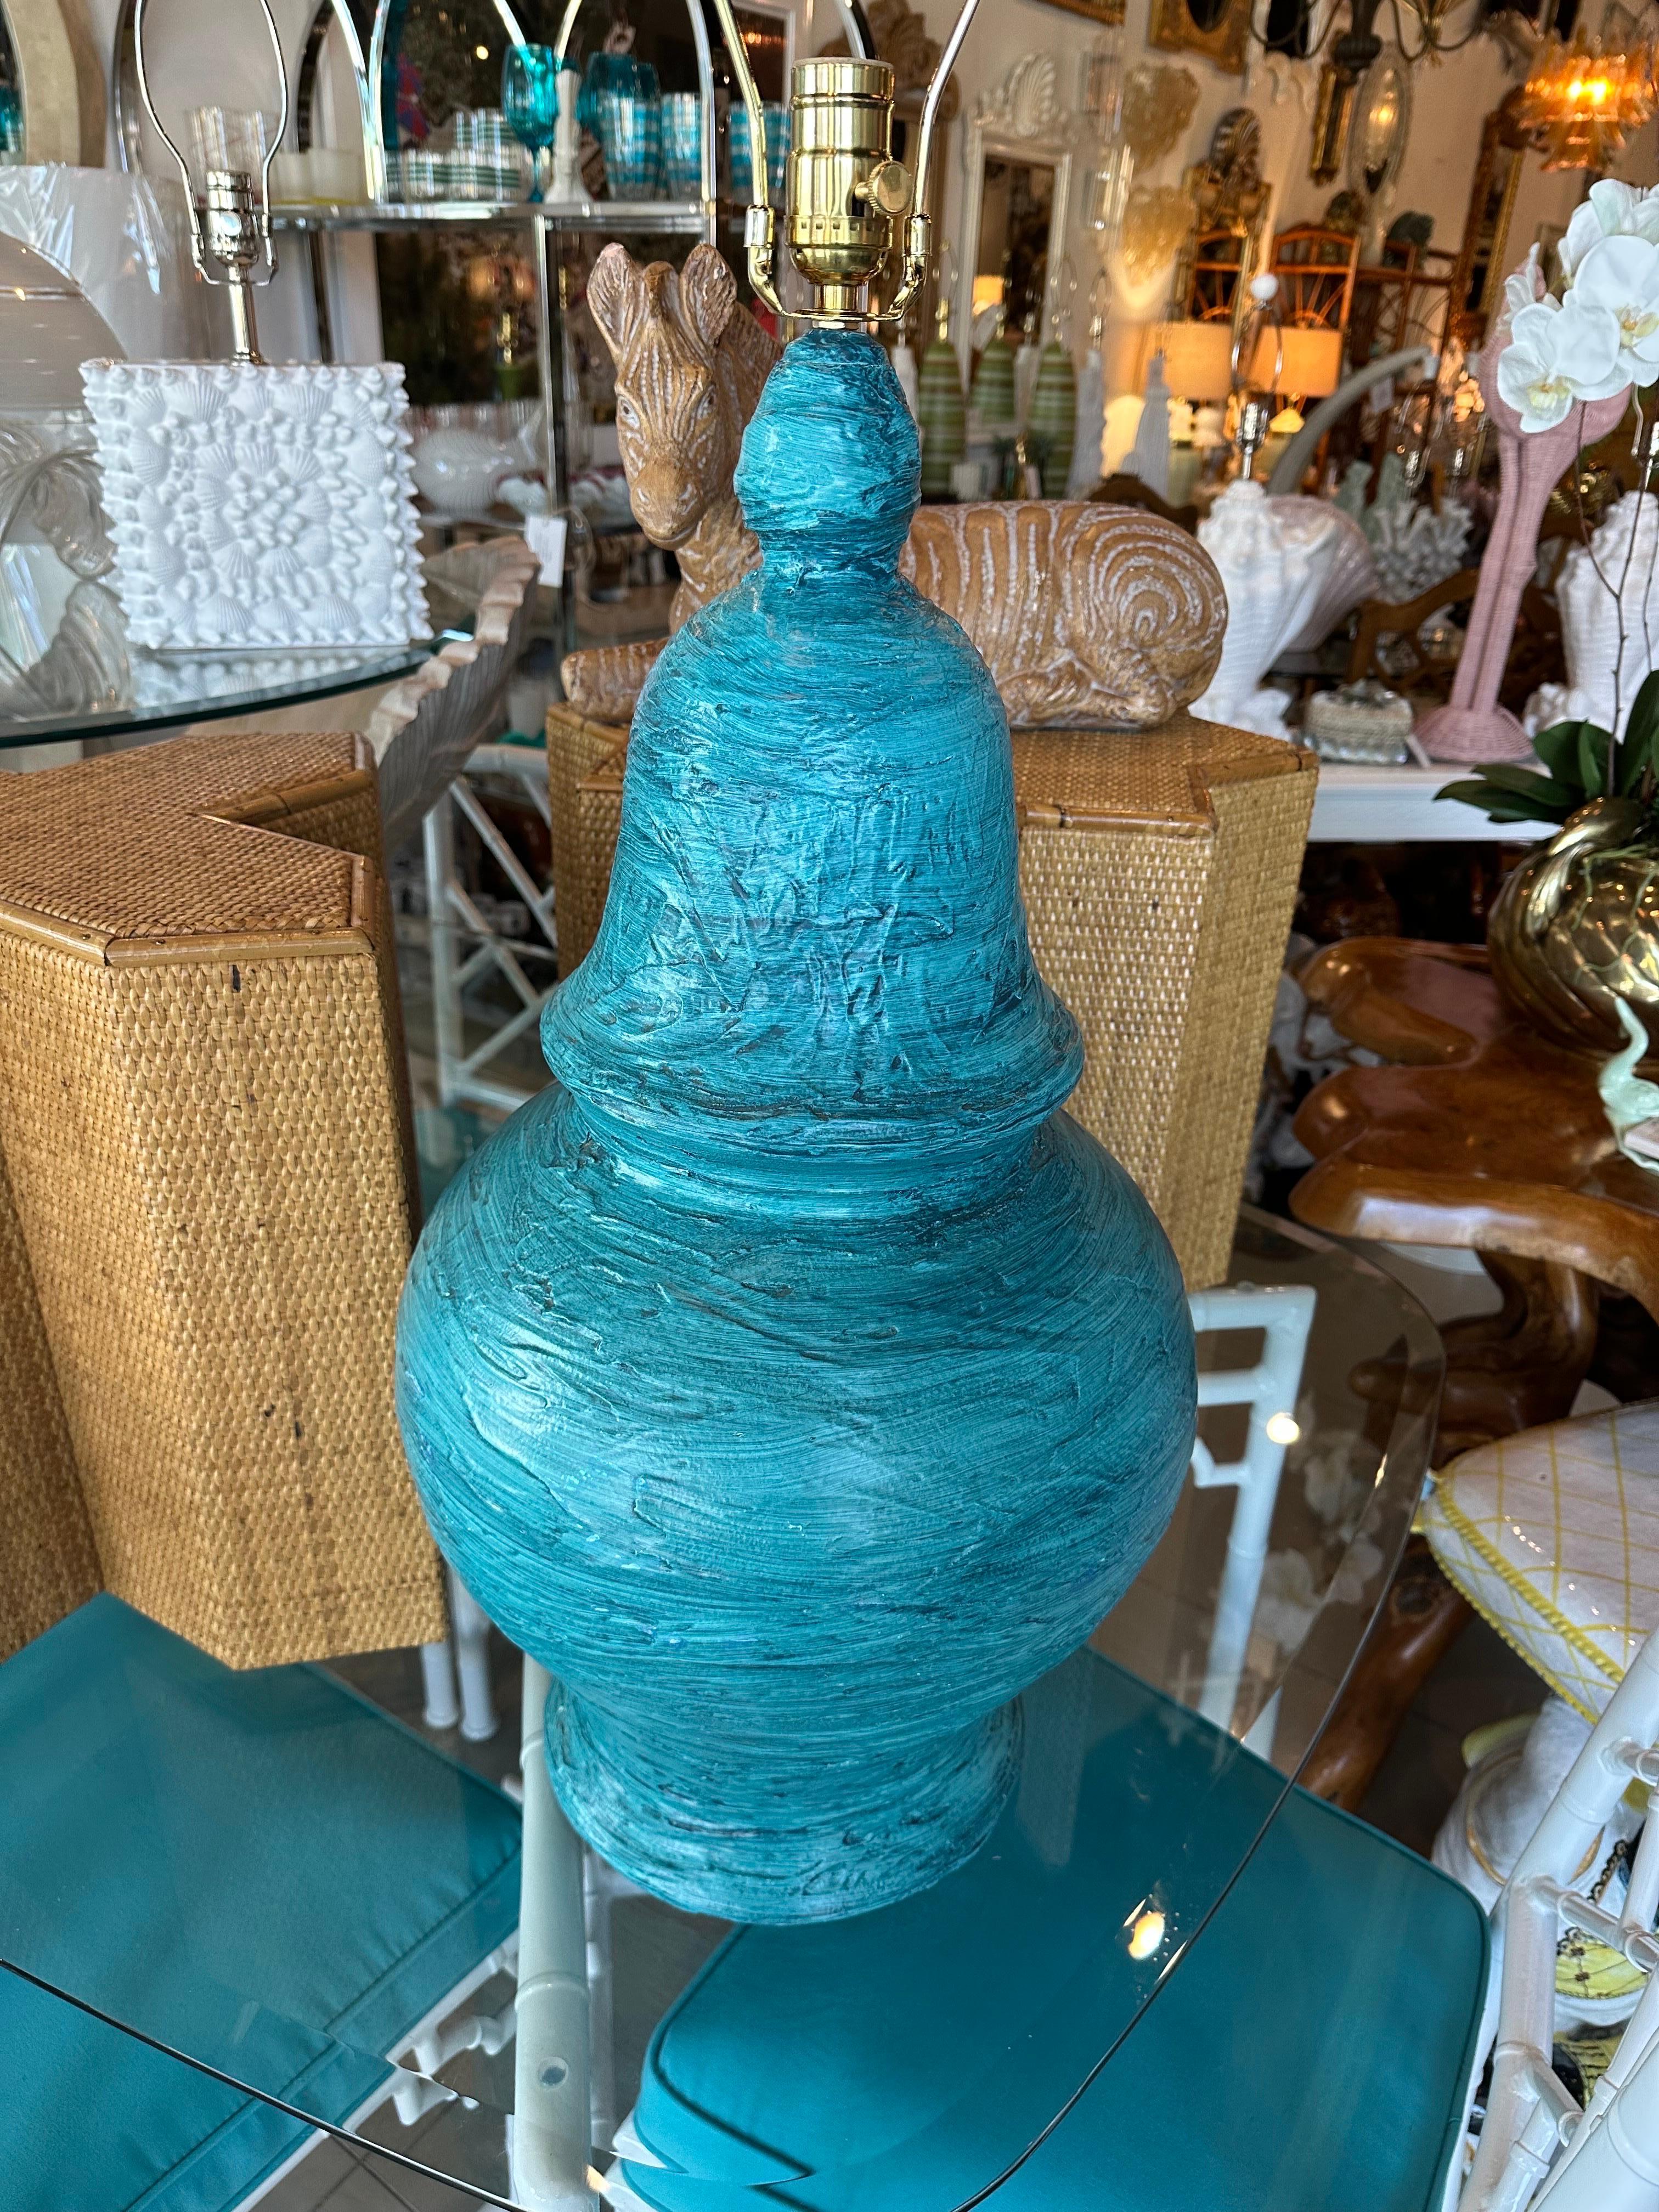 Large Mid-Century Modern Blue Terracotta Pottery Table Lamp Bitossi Style For Sale 1